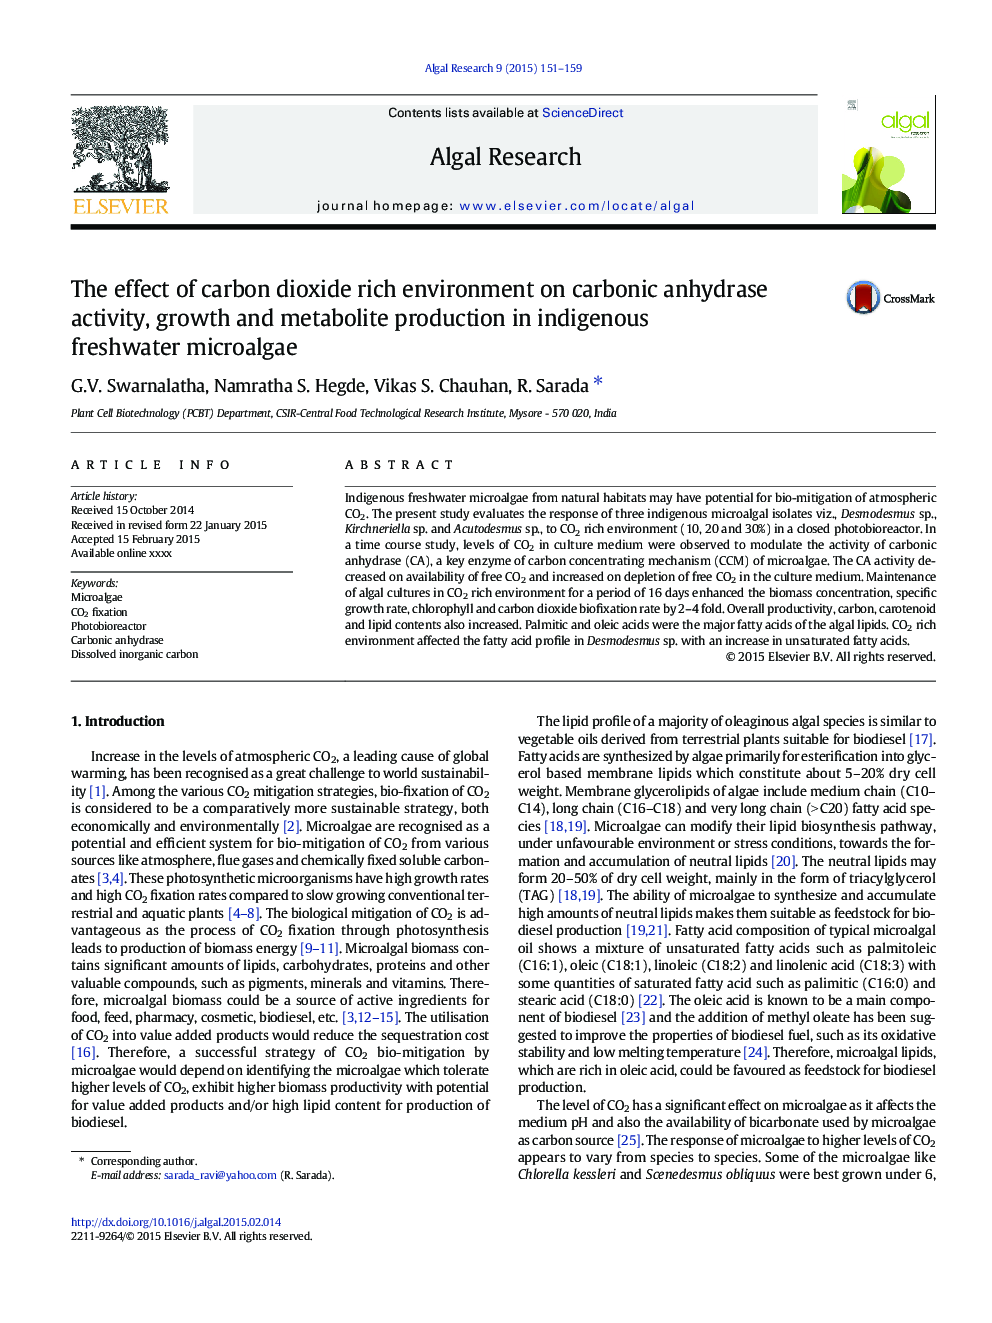 The effect of carbon dioxide rich environment on carbonic anhydrase activity, growth and metabolite production in indigenous freshwater microalgae